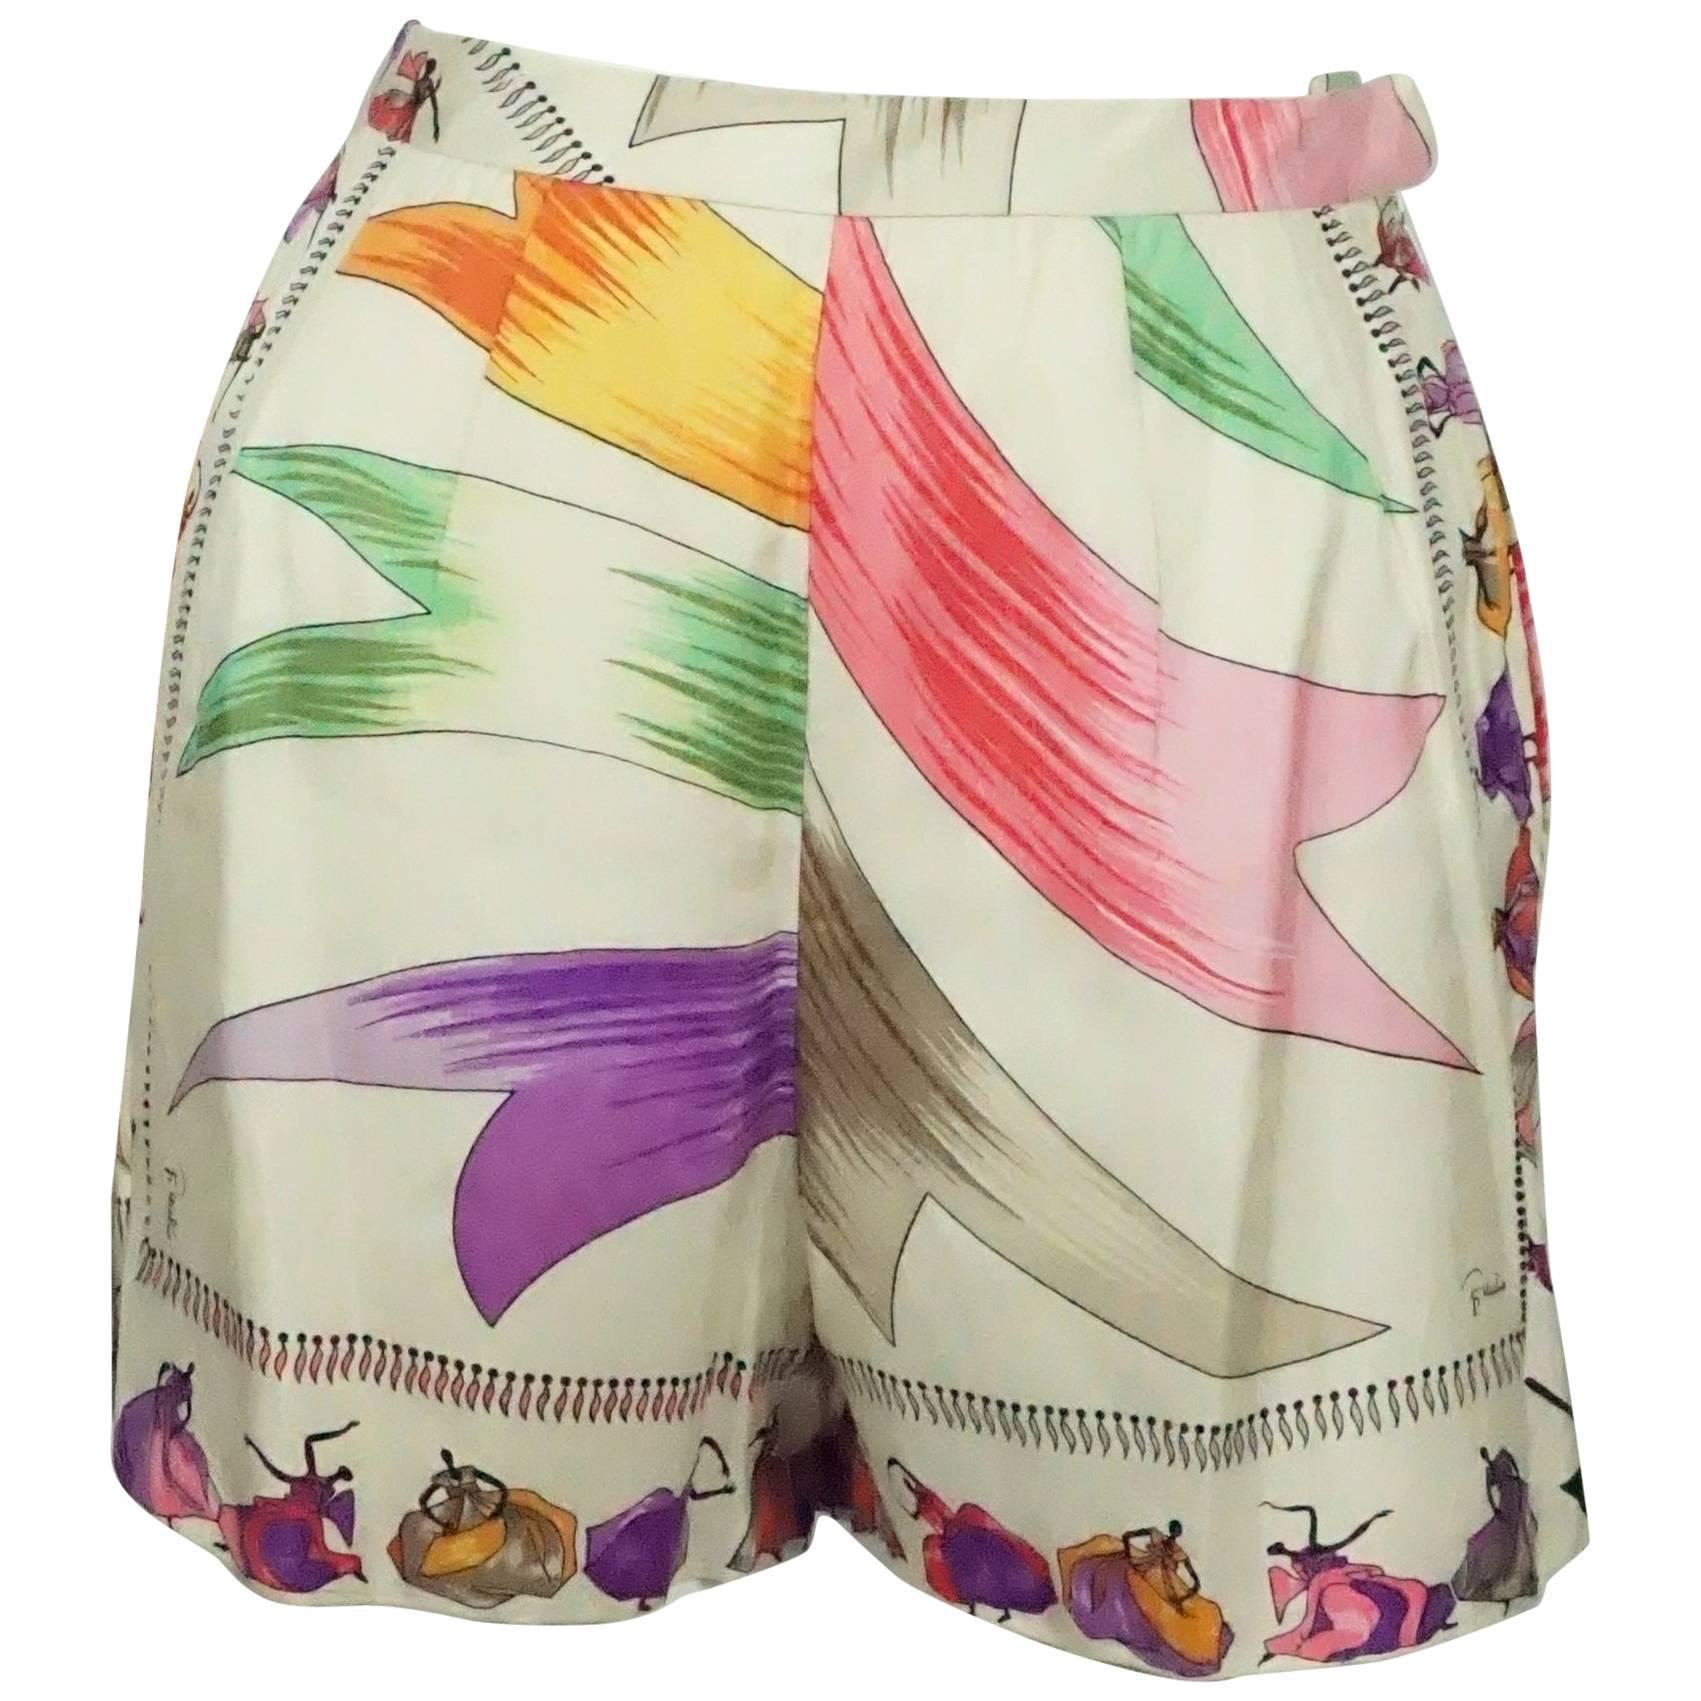 Emilio Pucci Ivory and Multi "Gowns" Silk Print Shorts - Small - Circa 60's